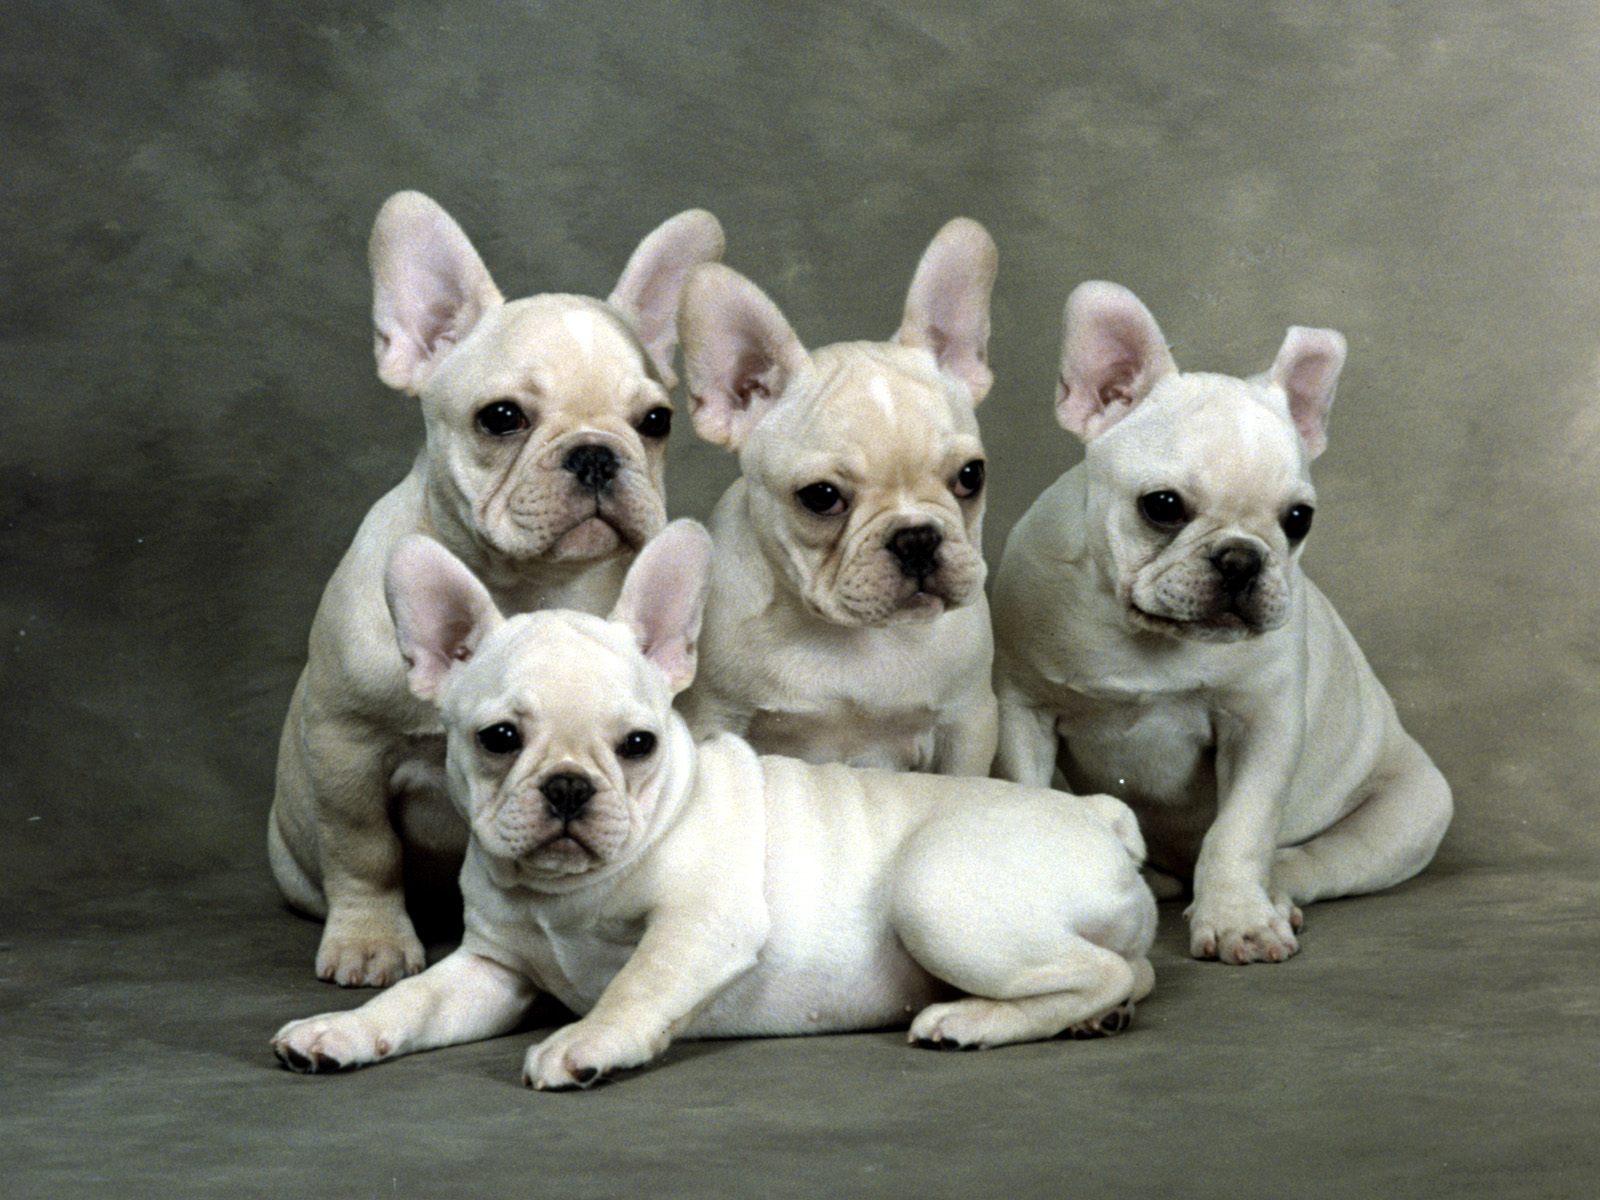 French Bulldogs: French Bulldogs - Easy methods to Look after and Coach ...